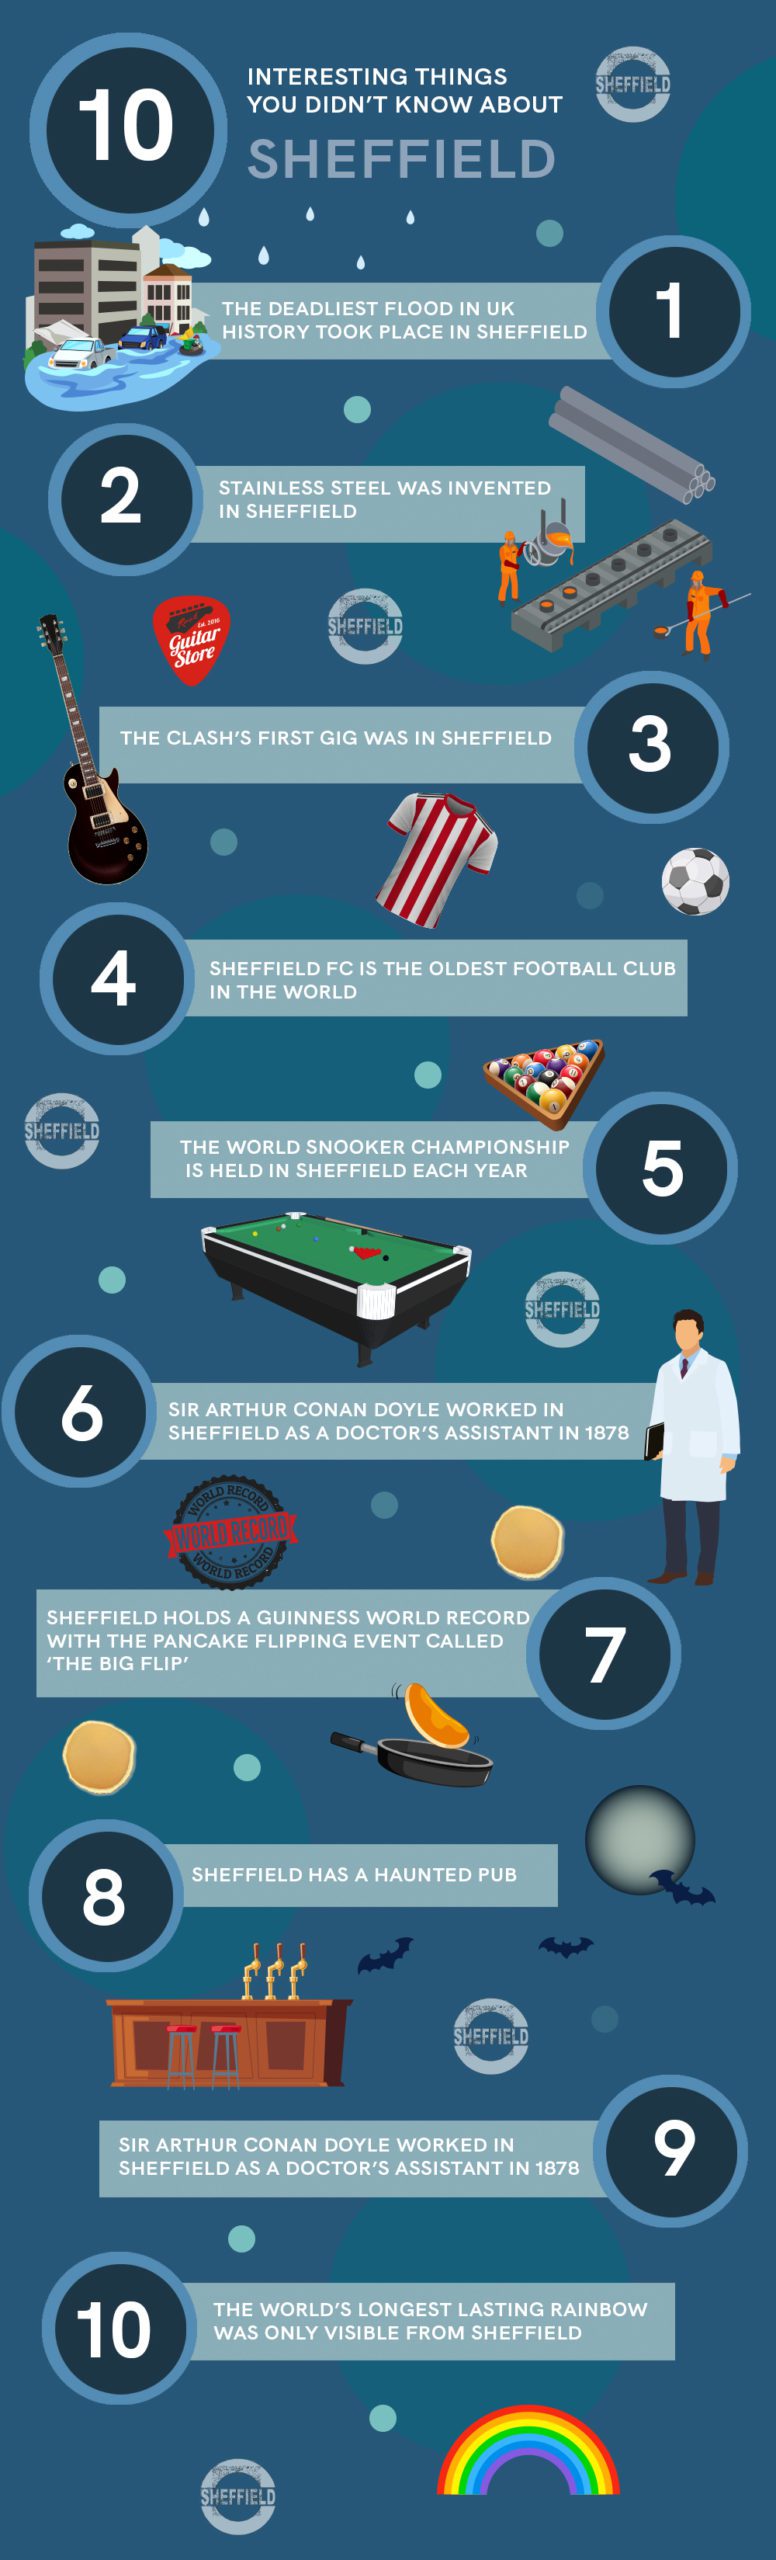 10 Things You Didn’t Know About Sheffield infographic